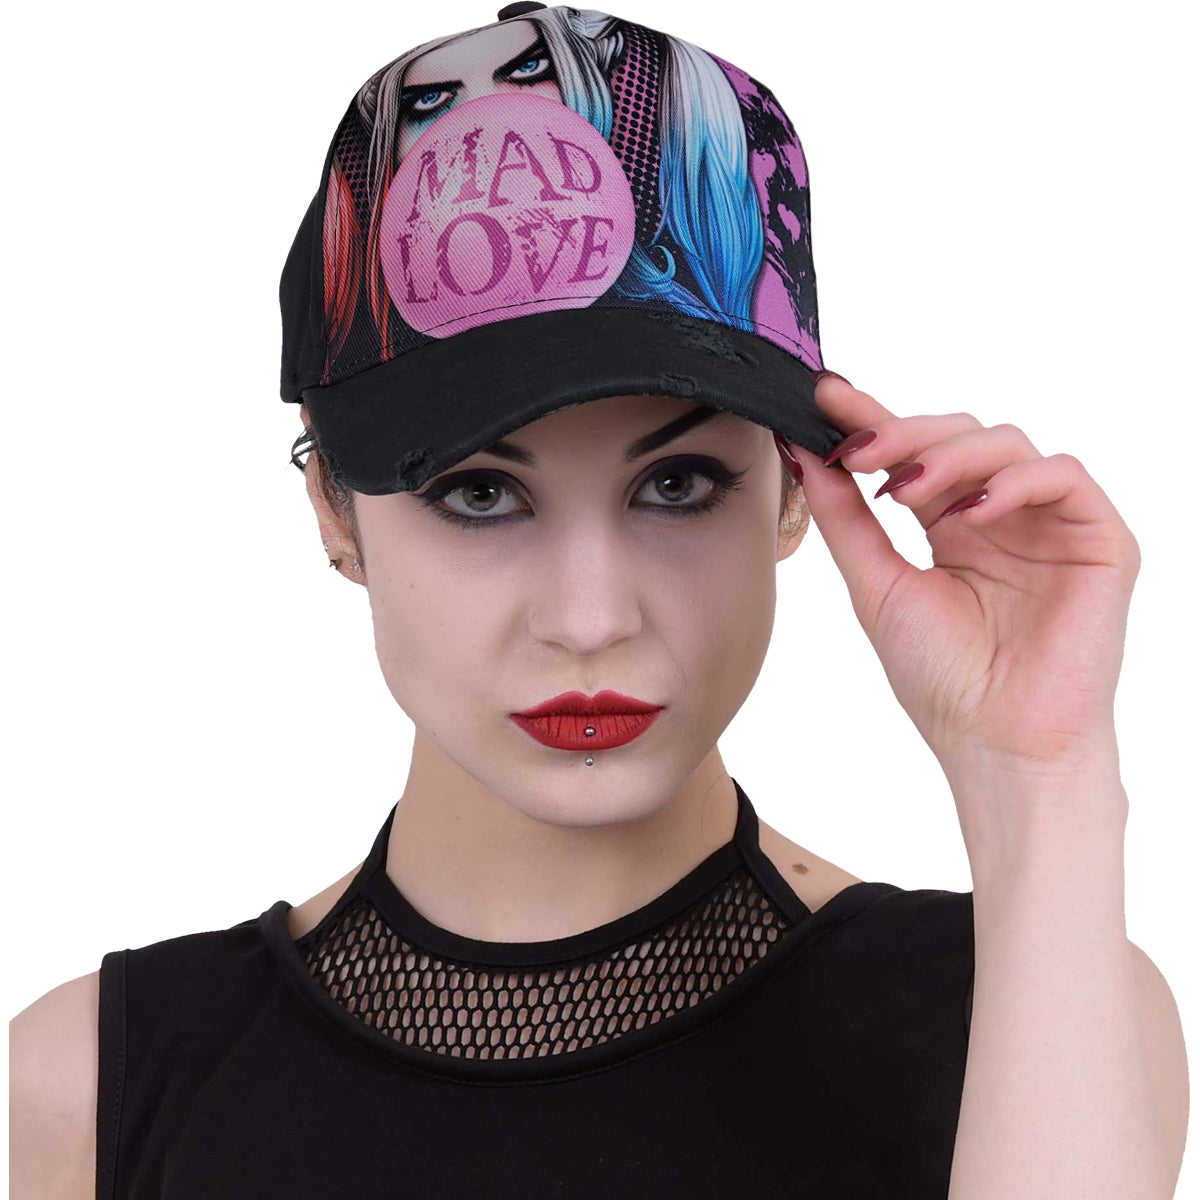 HARLEY QUINN - MAD LOVE - Baseball Caps Distressed with Metal Clasp